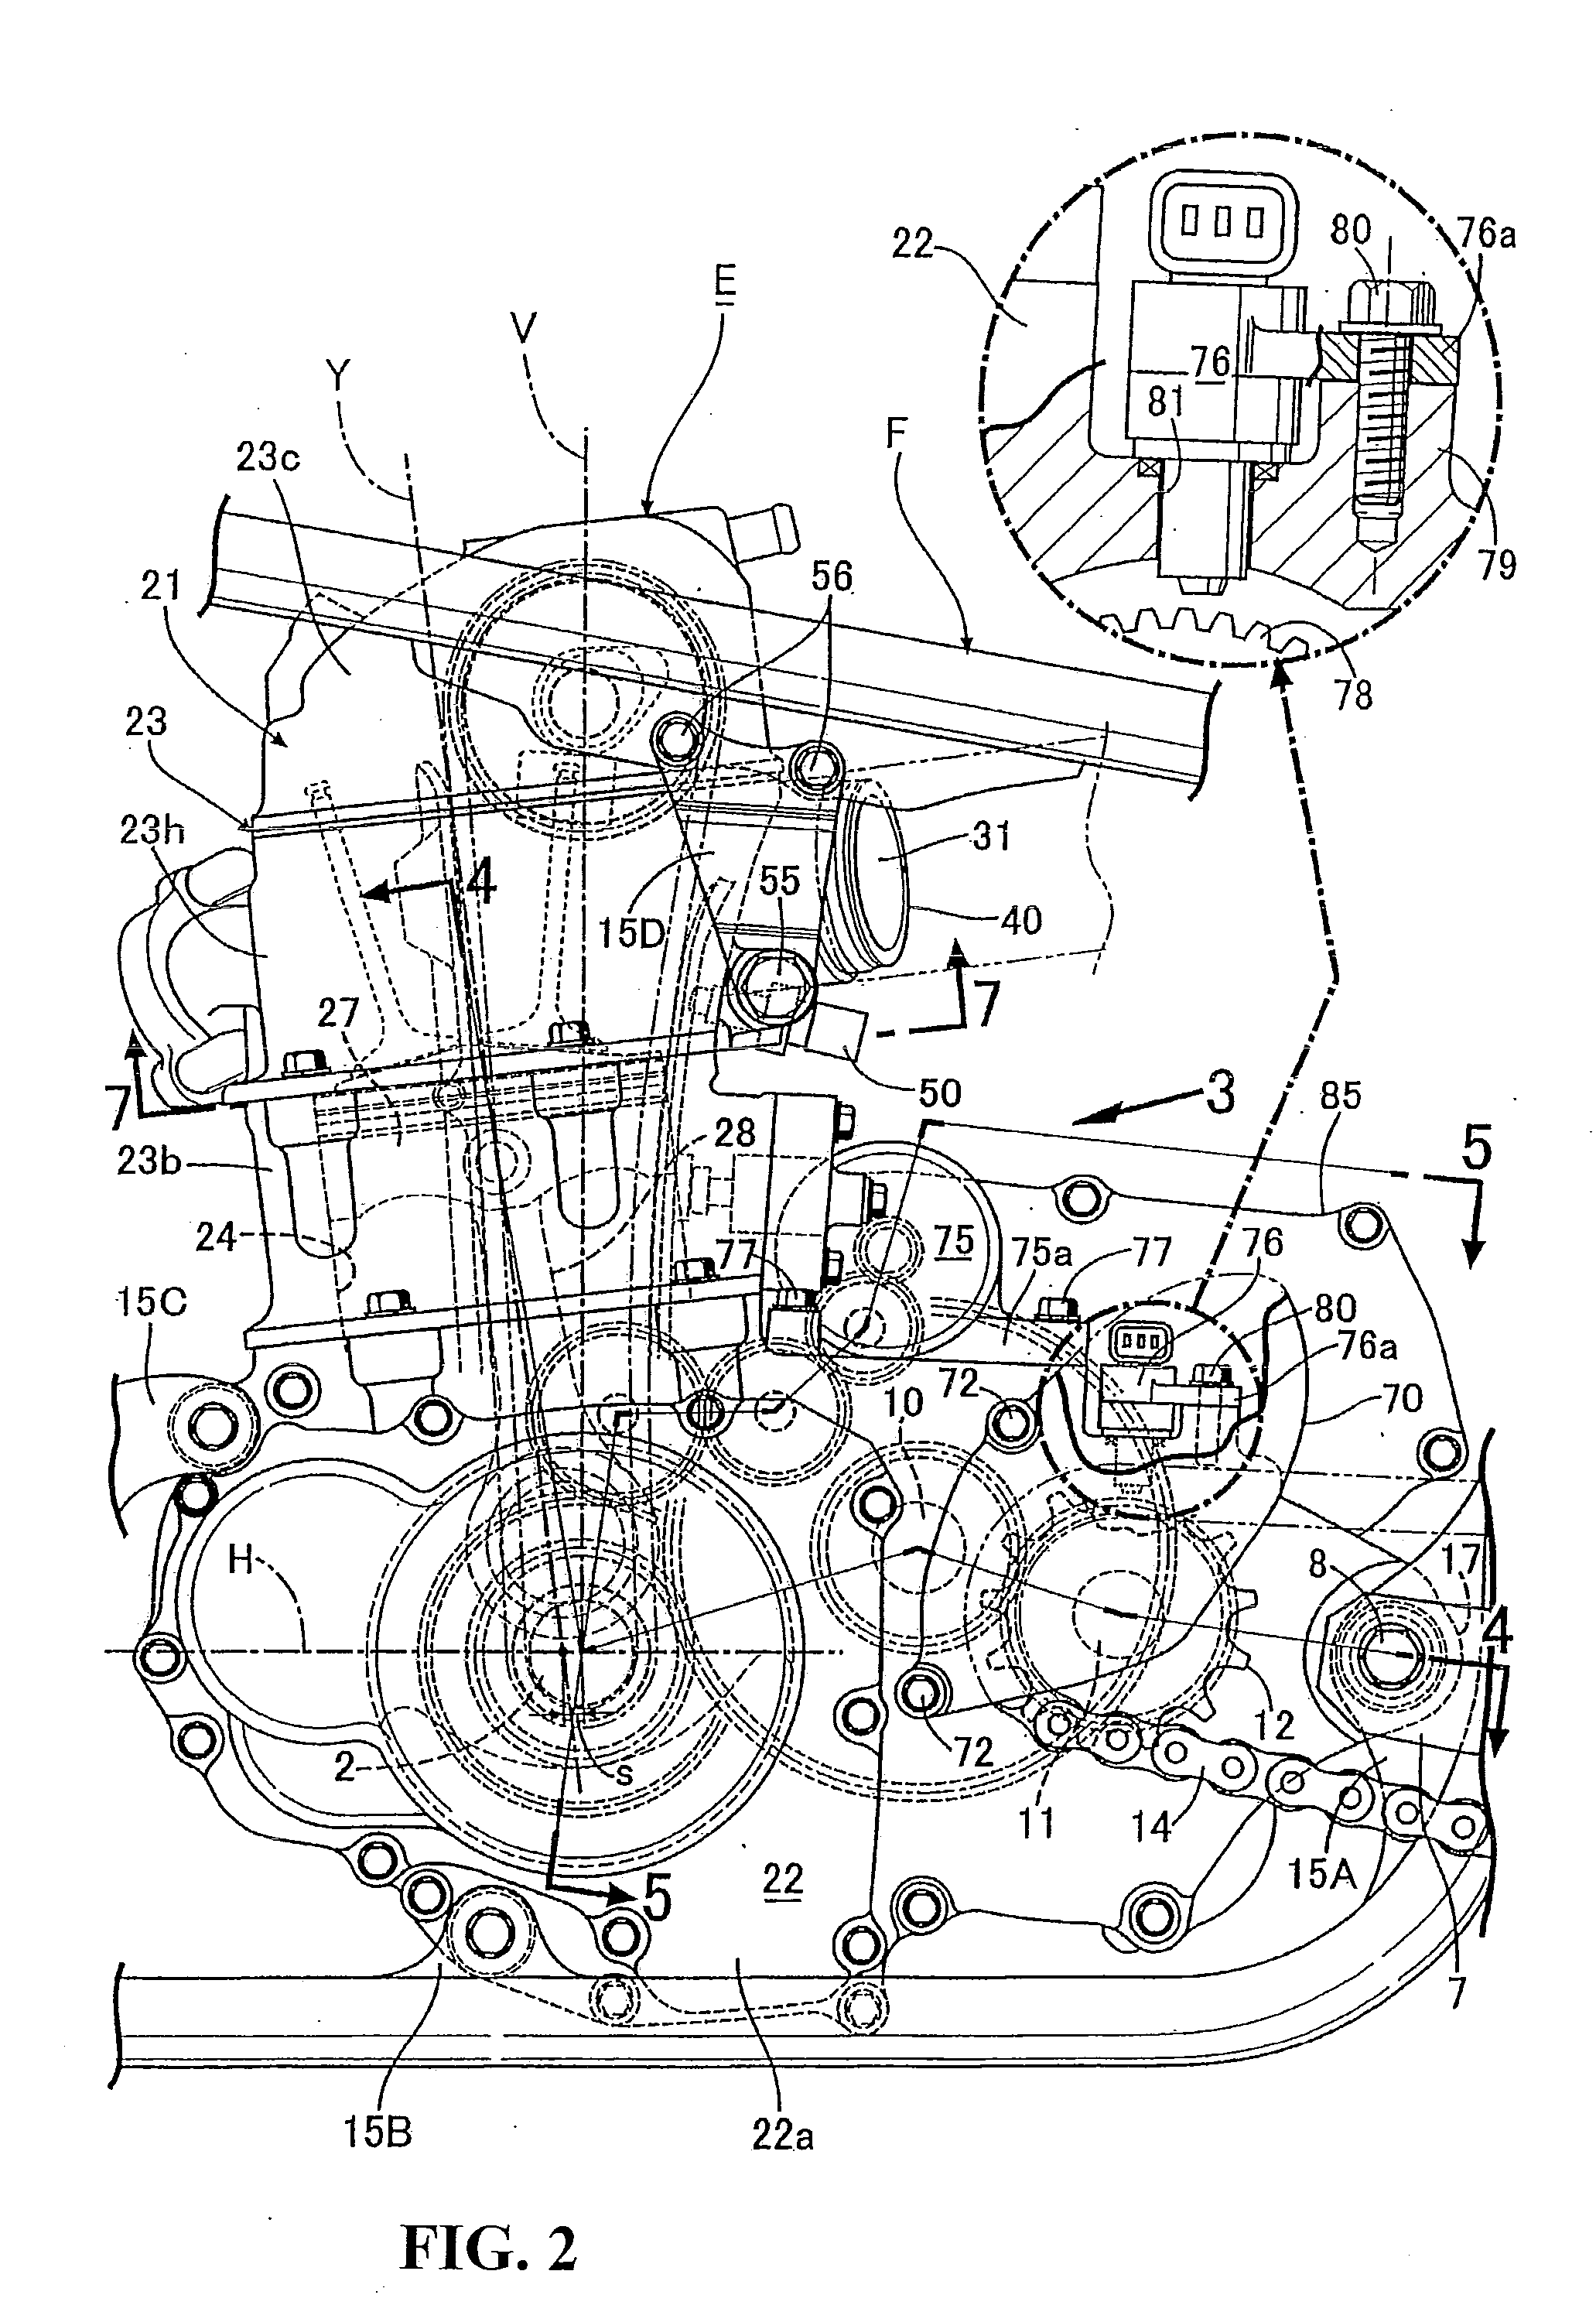 Engine for vehicle